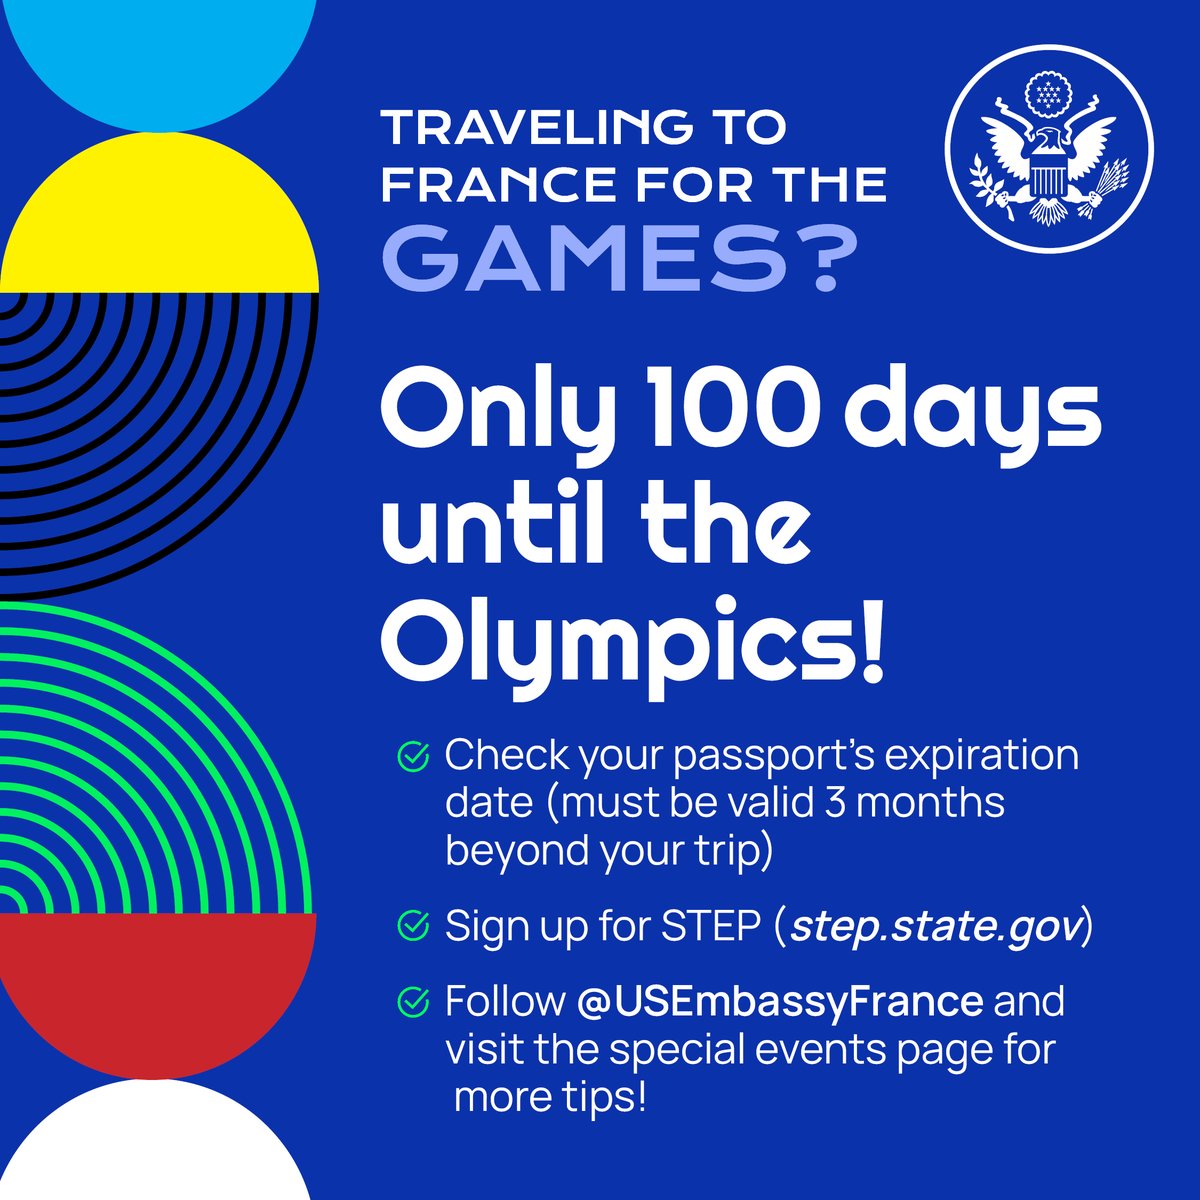 Only 100 days until the Olympics! Which event are you most excited to watch? If you're planning to travel for the Games, check your passport expiration date NOW and be sure to visit @USEmbassyFrance's events page for everything you need to need to know as you get ready for your…